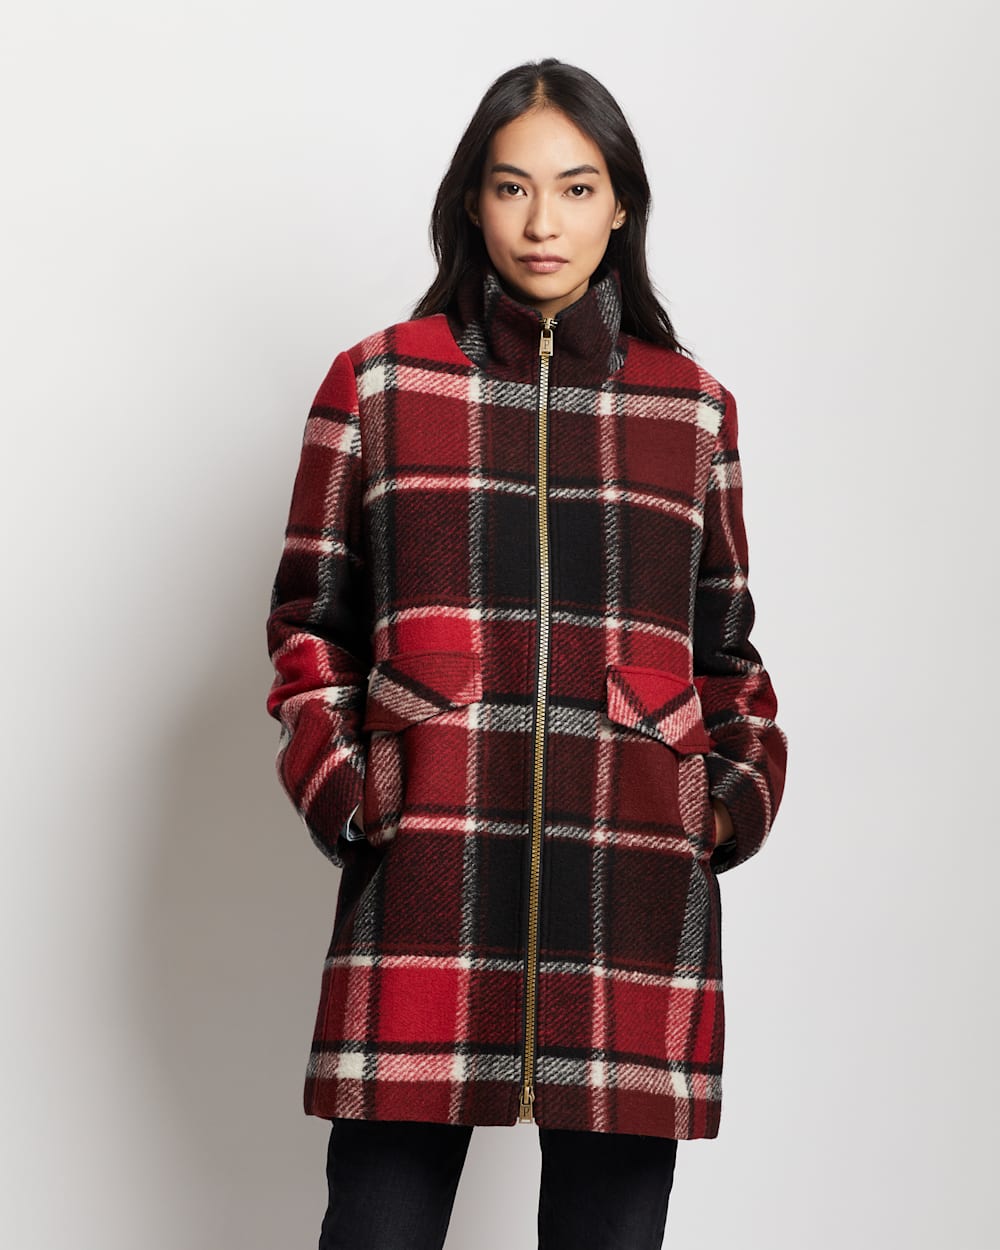 ALTERNATE VIEW OF WOMEN'S CAMDEN TOPPER COAT IN RED/BLACK EXPLODED PLAID image number 6